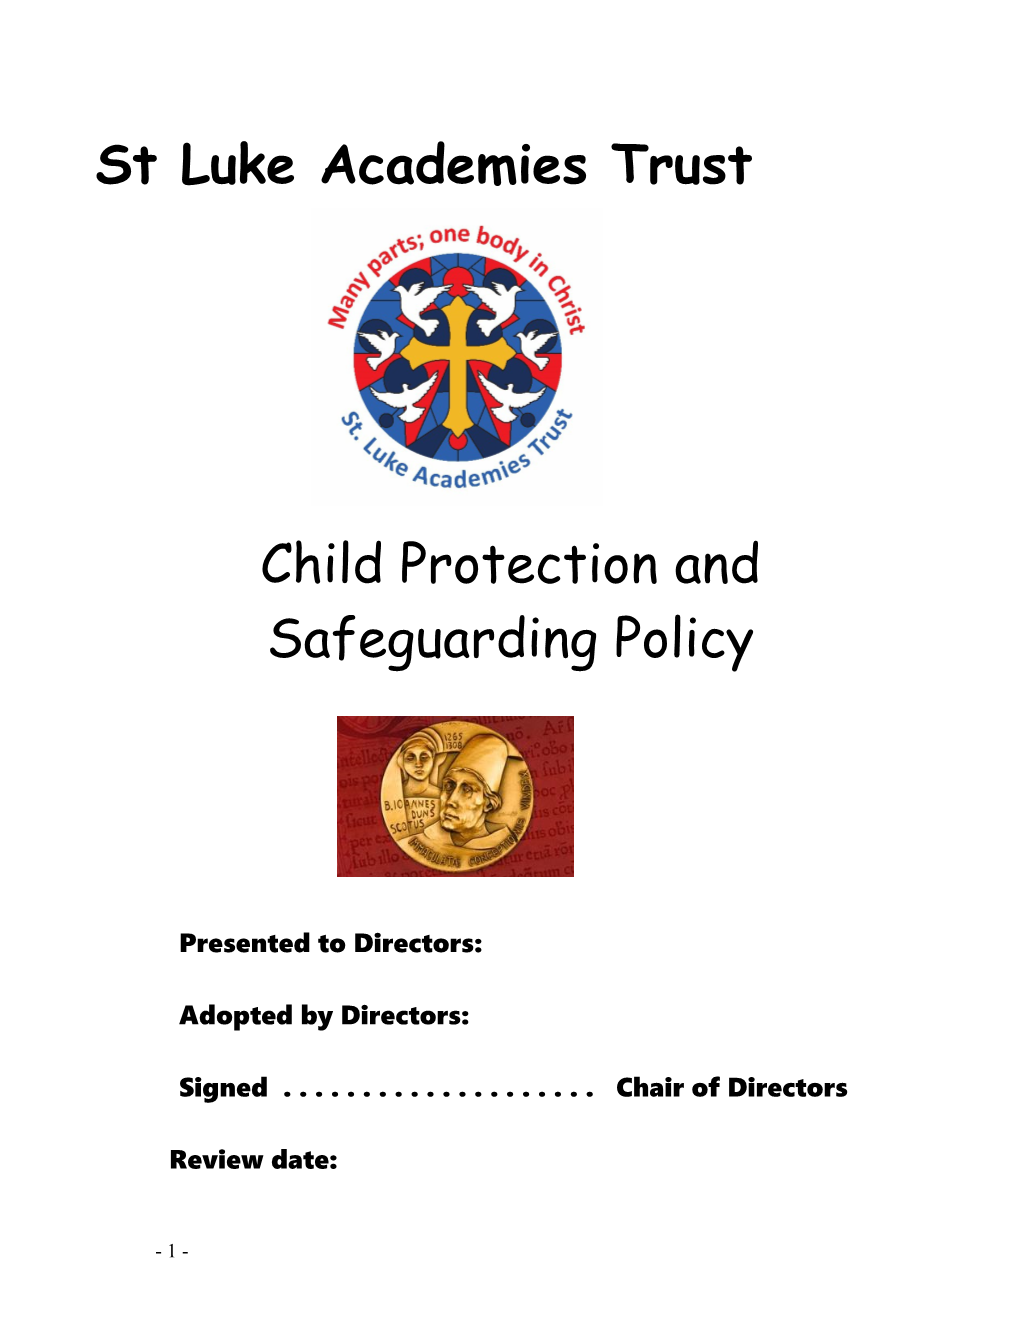 Safeguarding Model Policy and Procedures (Aug 2013)